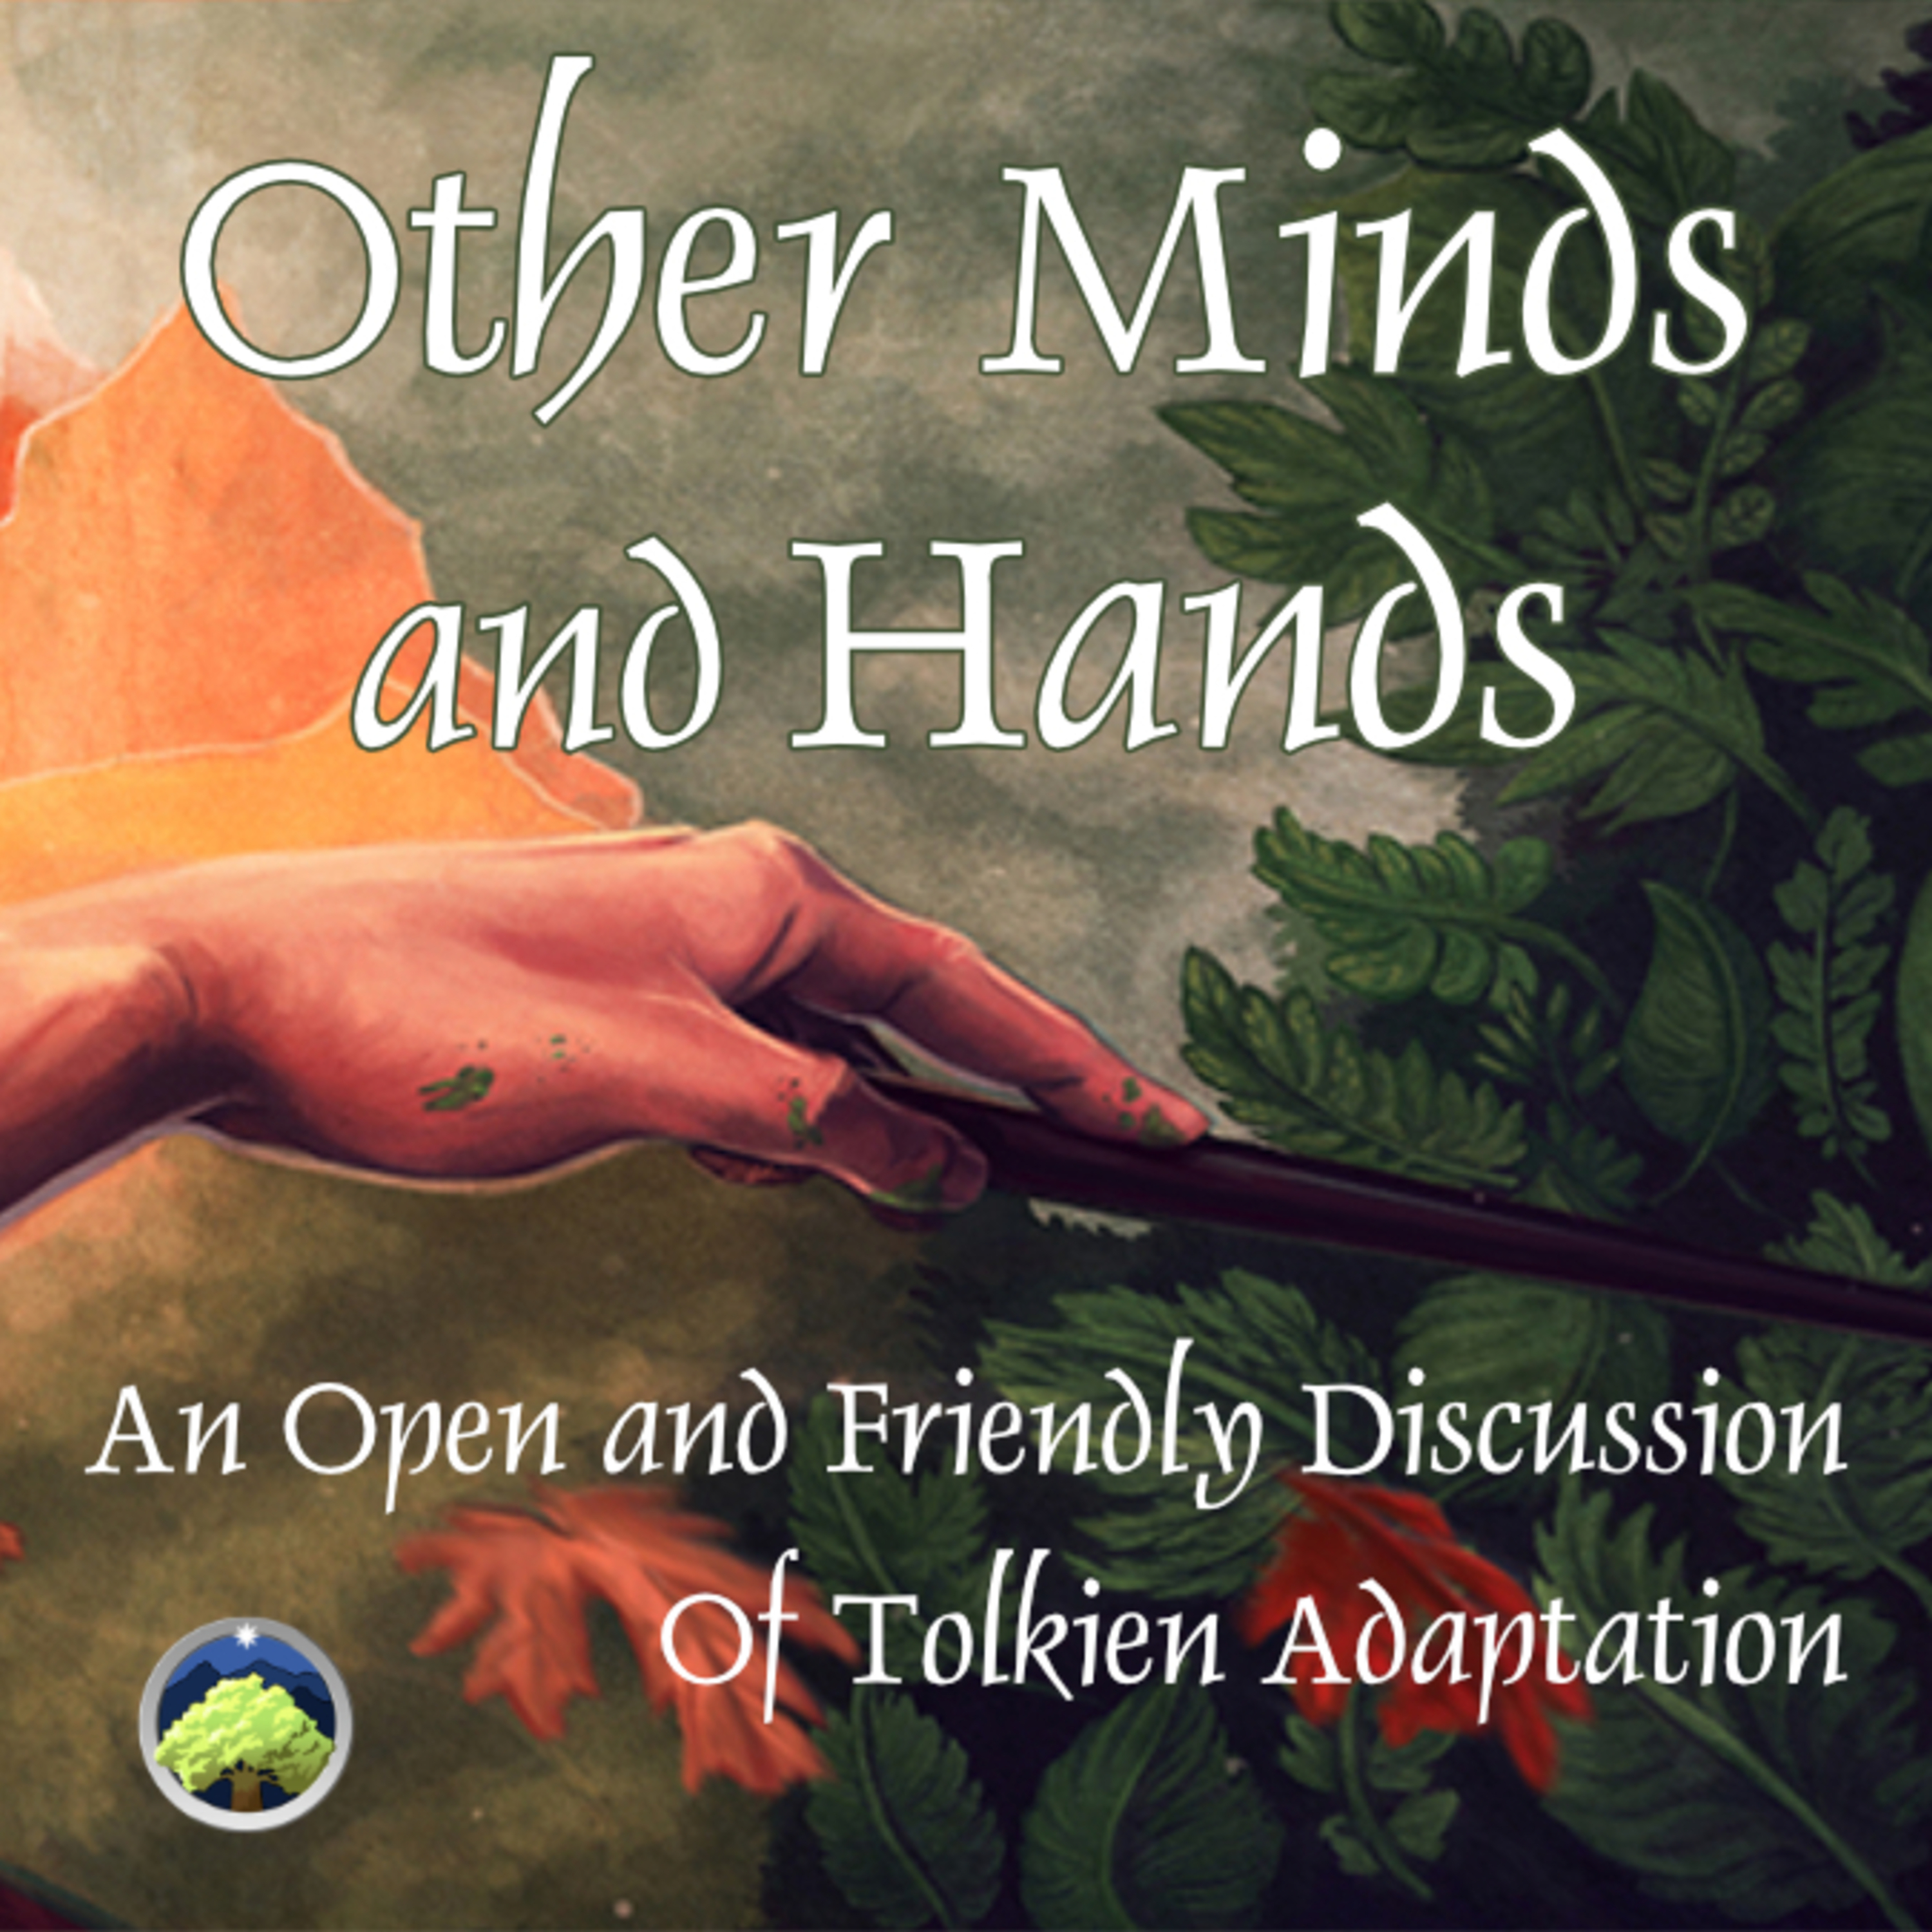 556: Other Minds and Hands, Episode 61